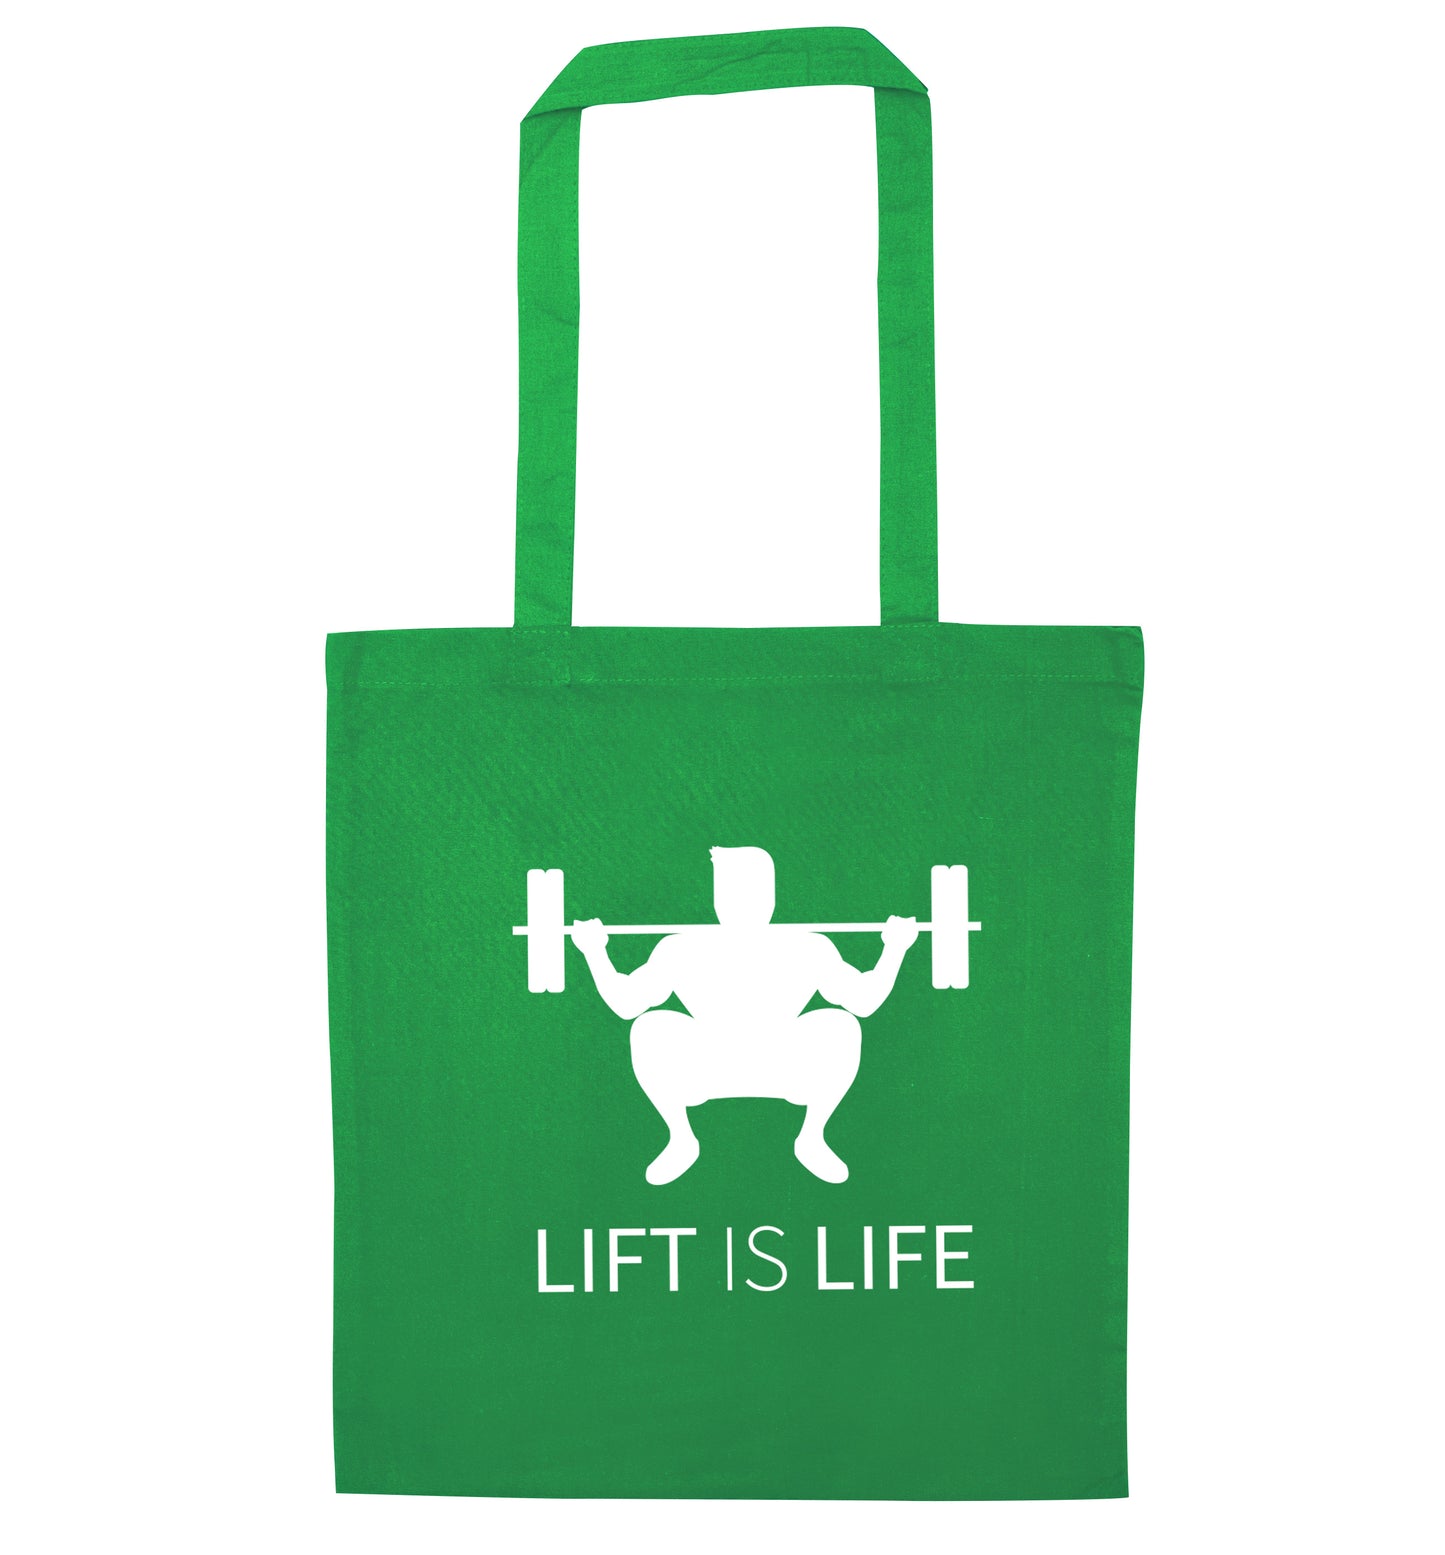 Lift is life green tote bag